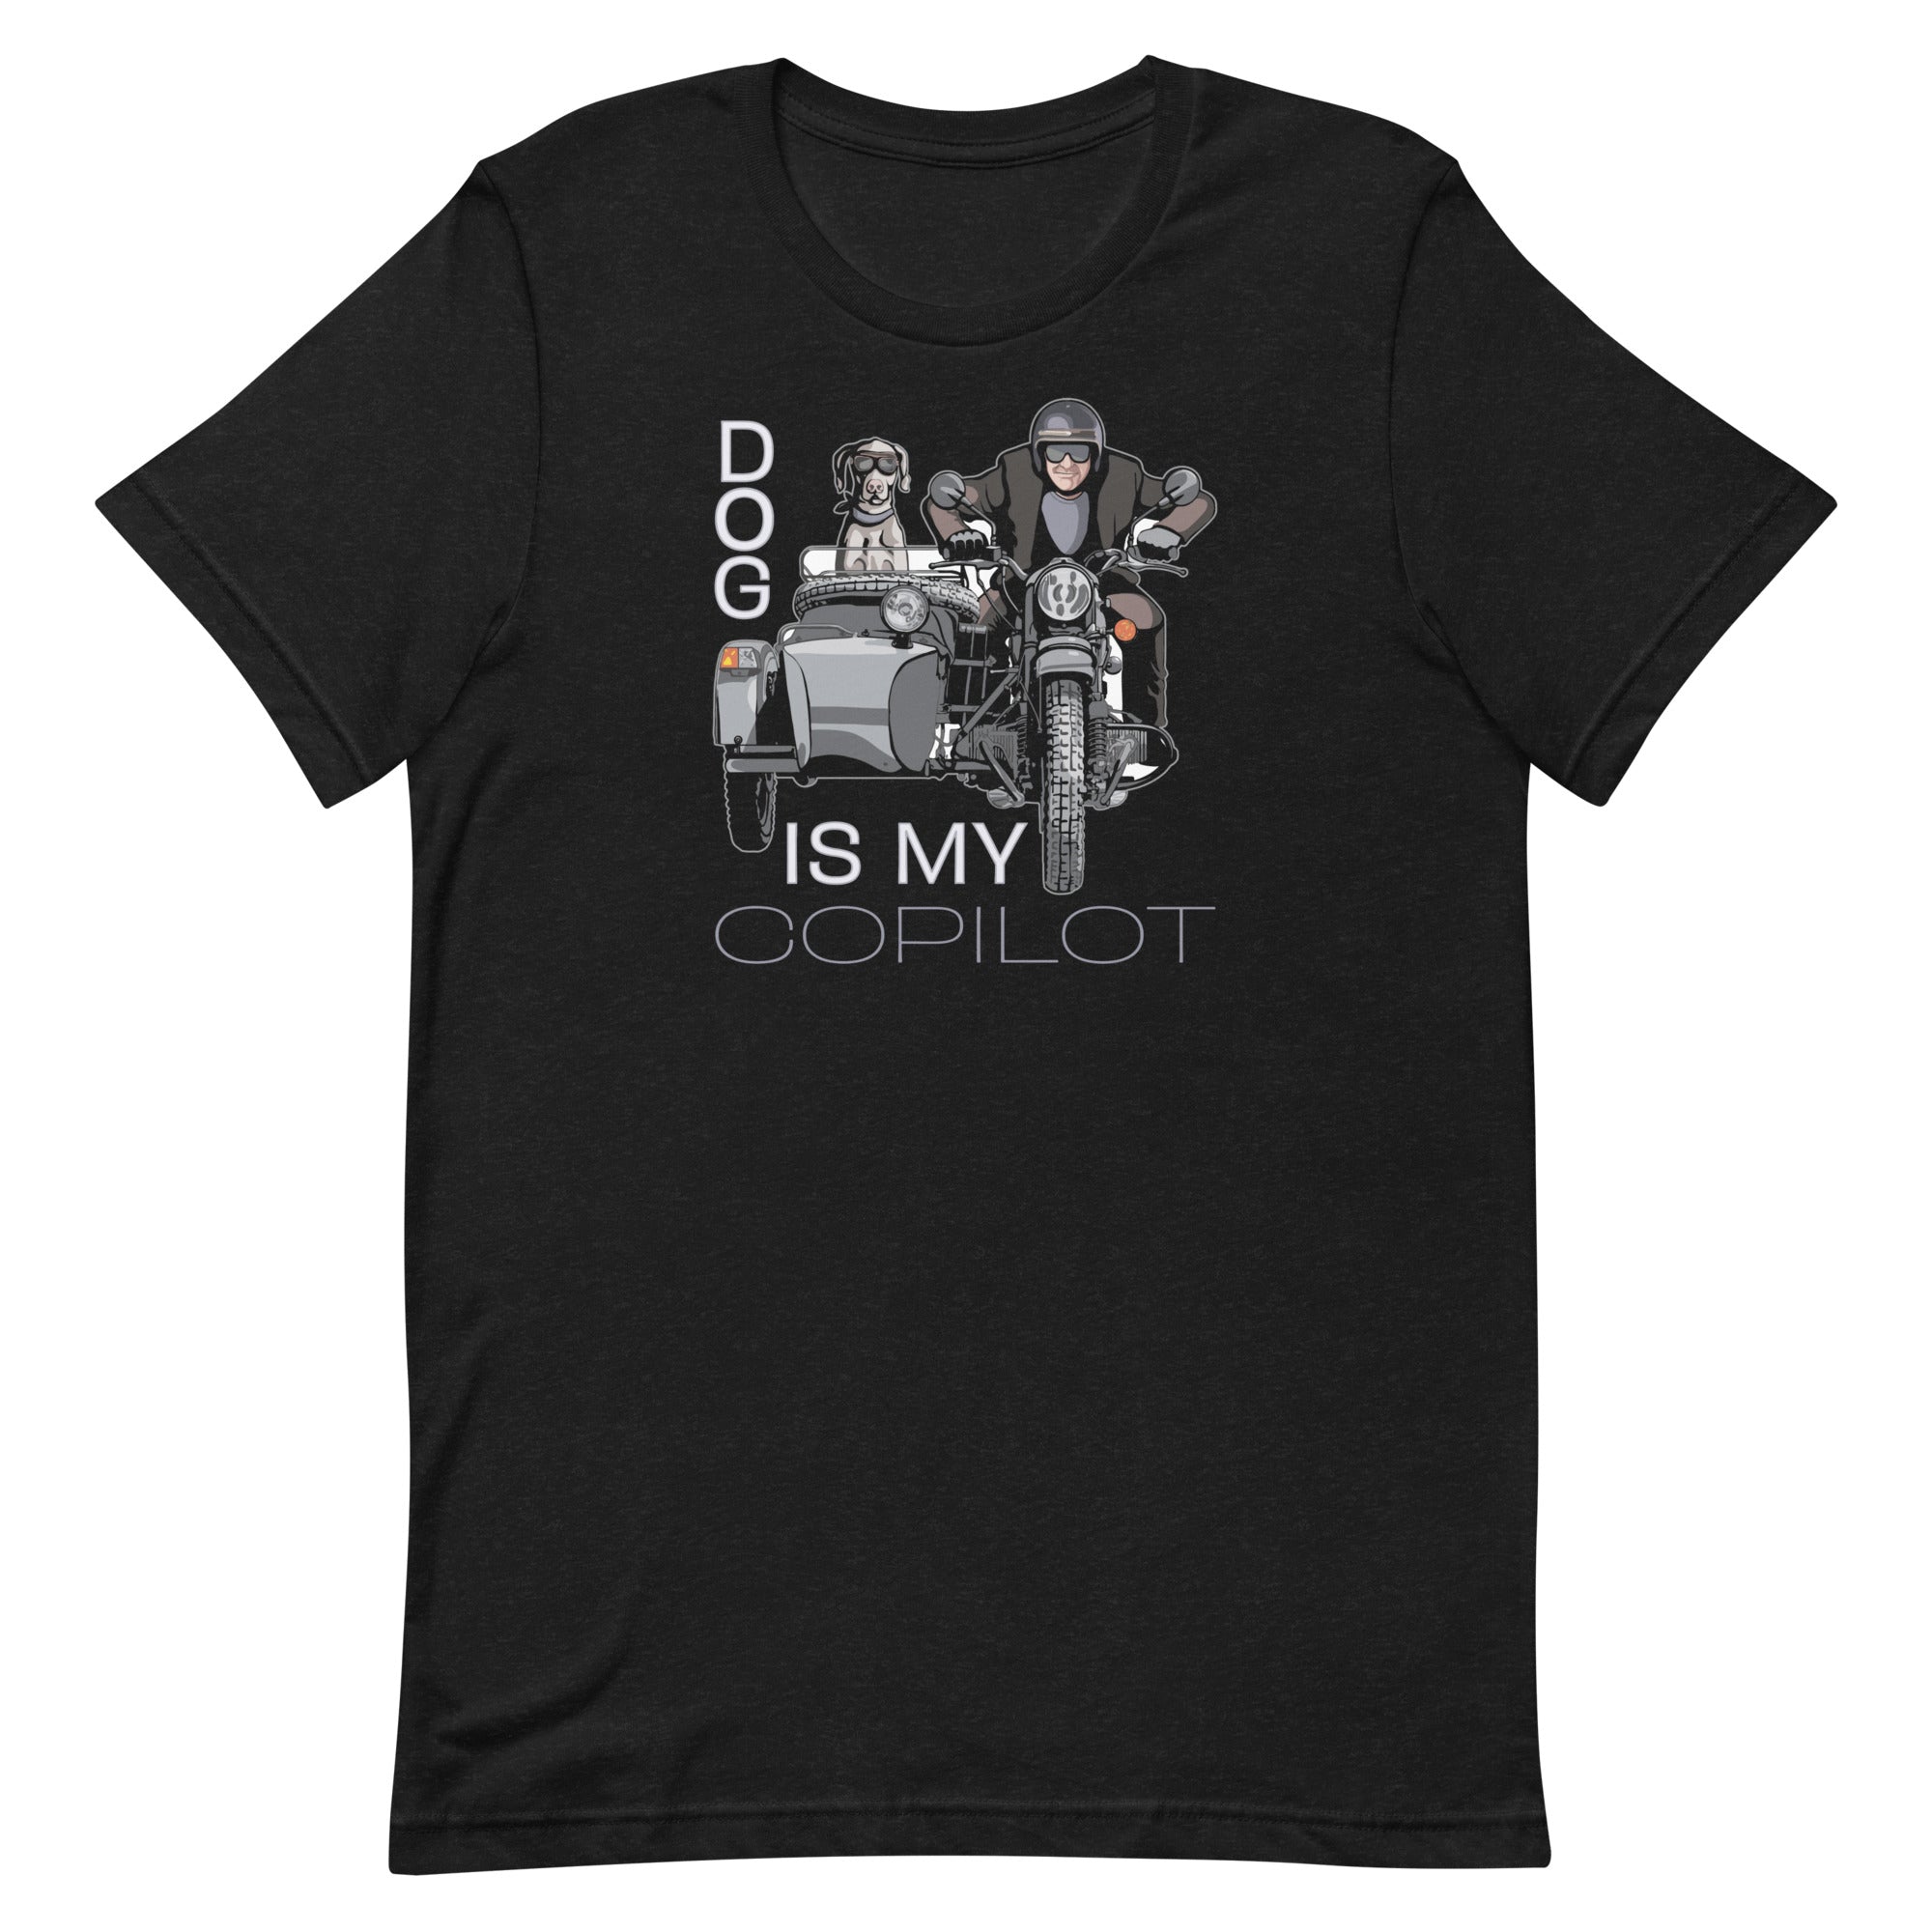 "Dog is My Co-Pilot" Motorcycle Tee Shirt